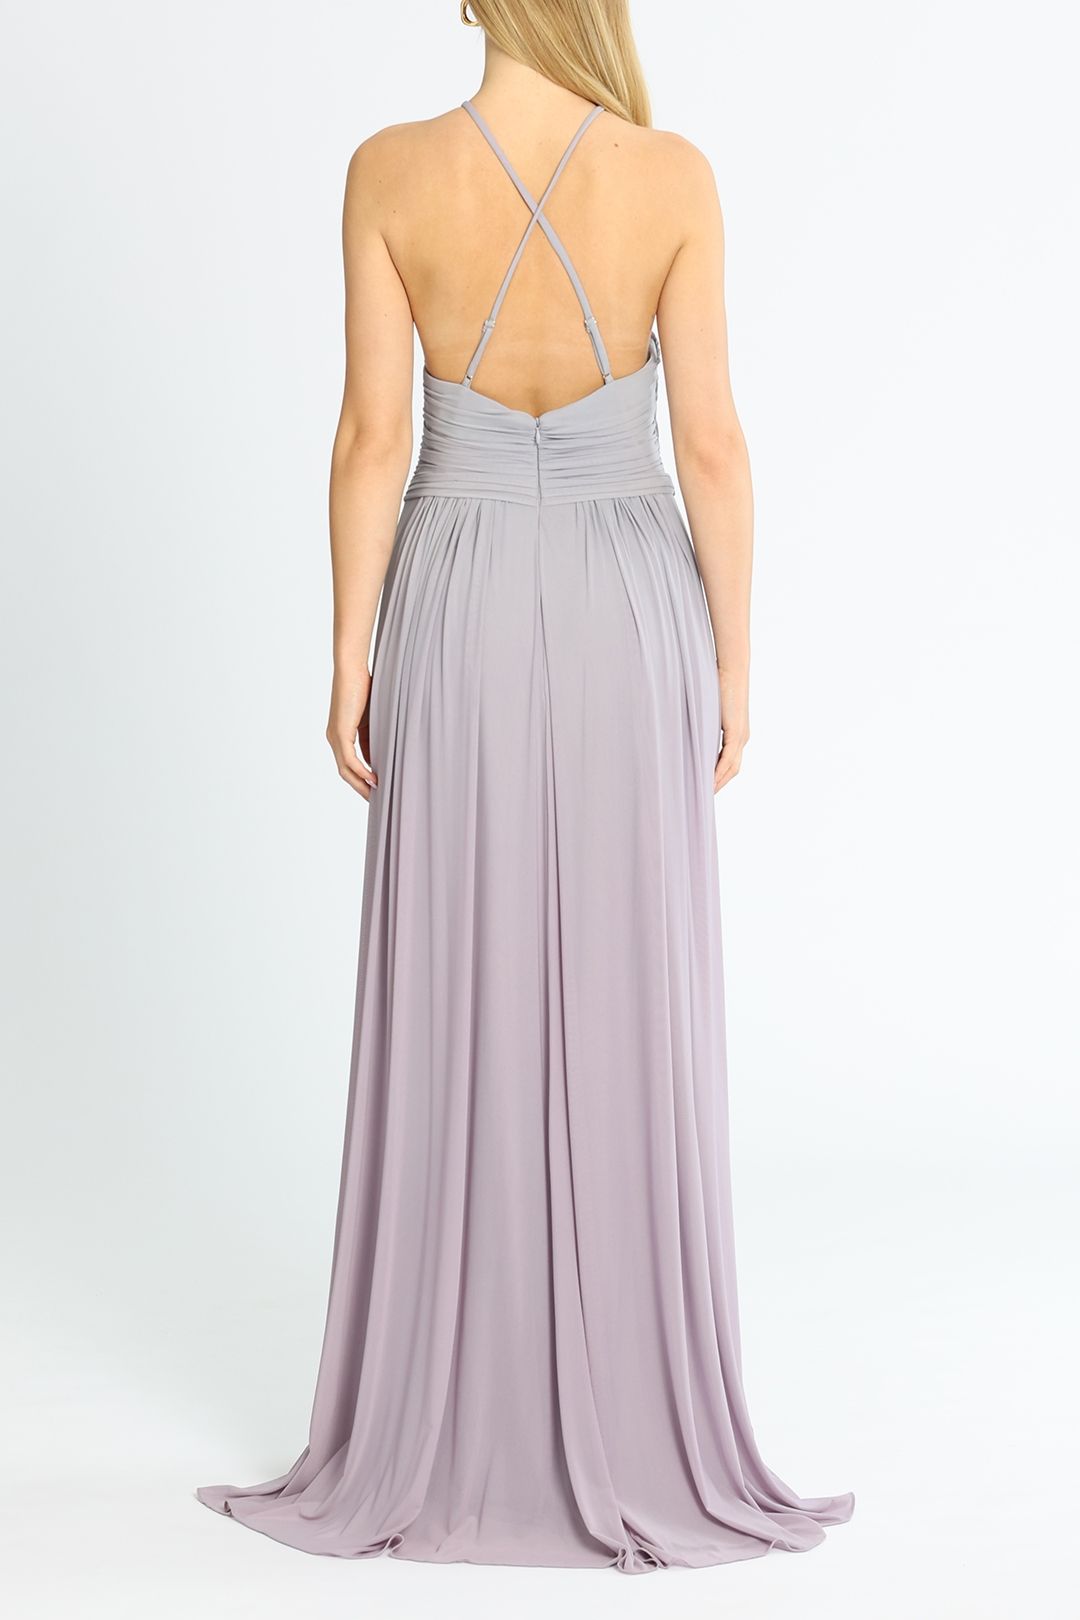 Tania Olsen Andie Gown Lavender Backless